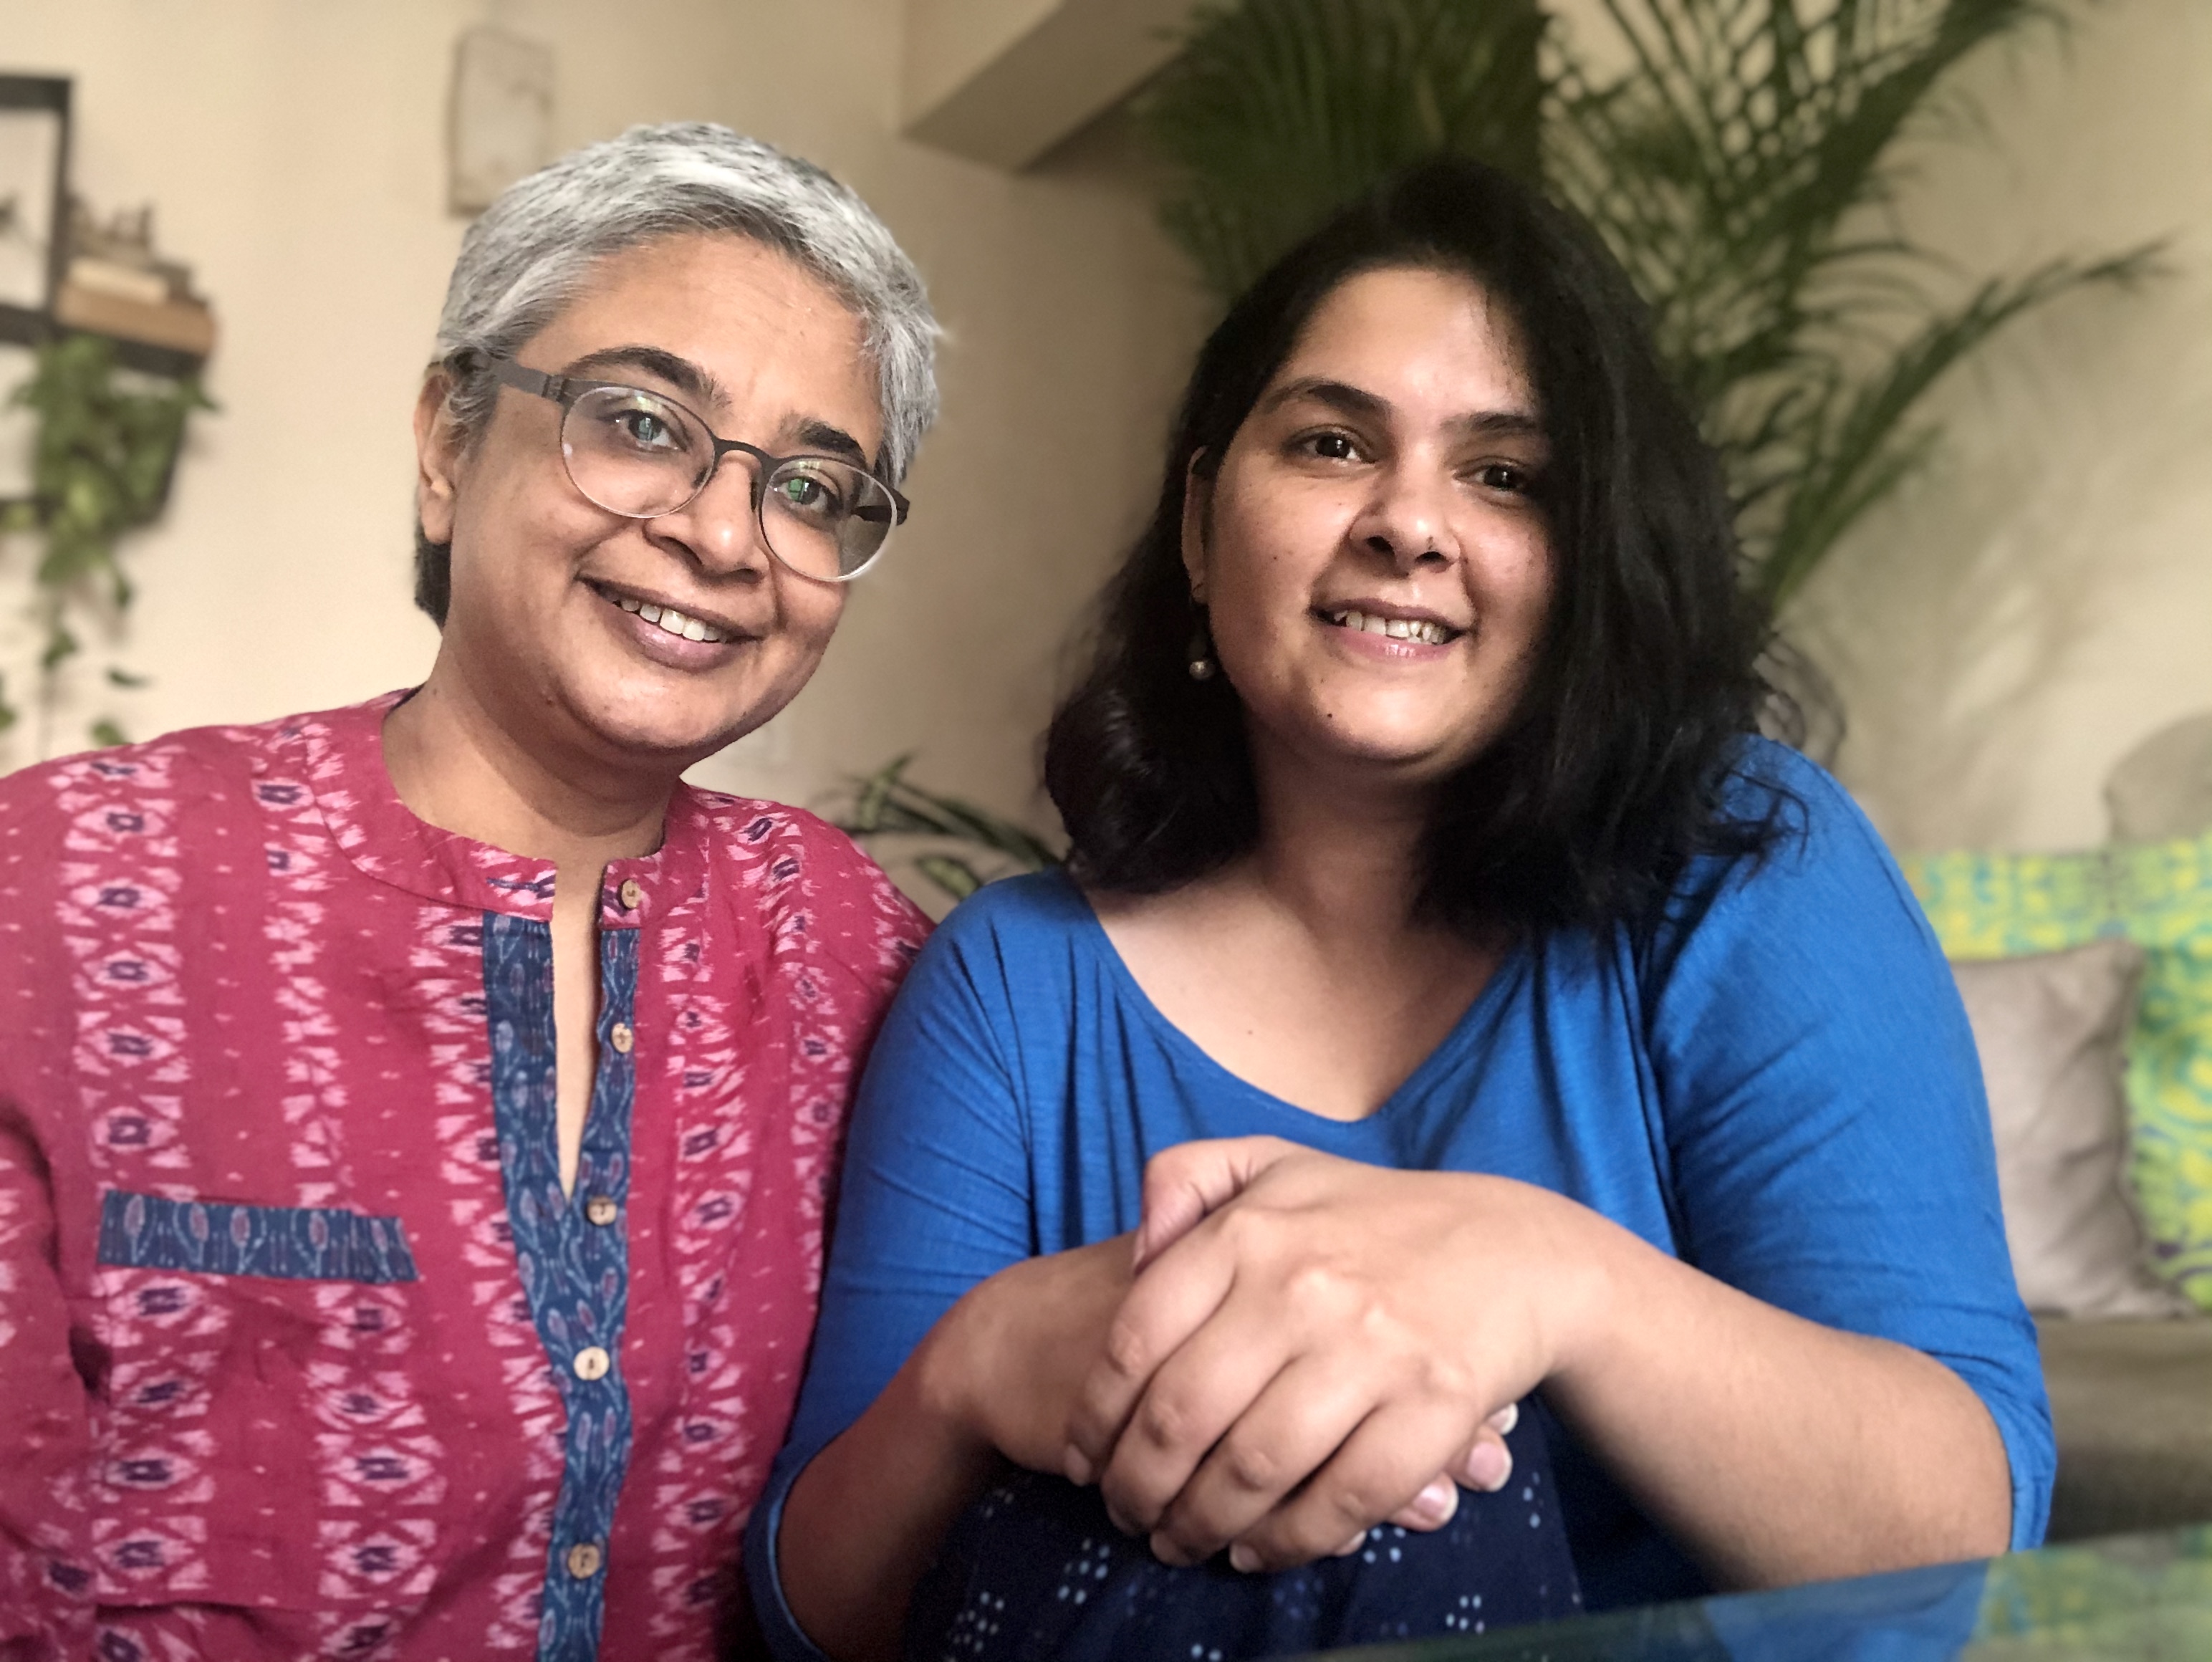 Is India Ready to Legalize LGBTQ Marriage? Time pic